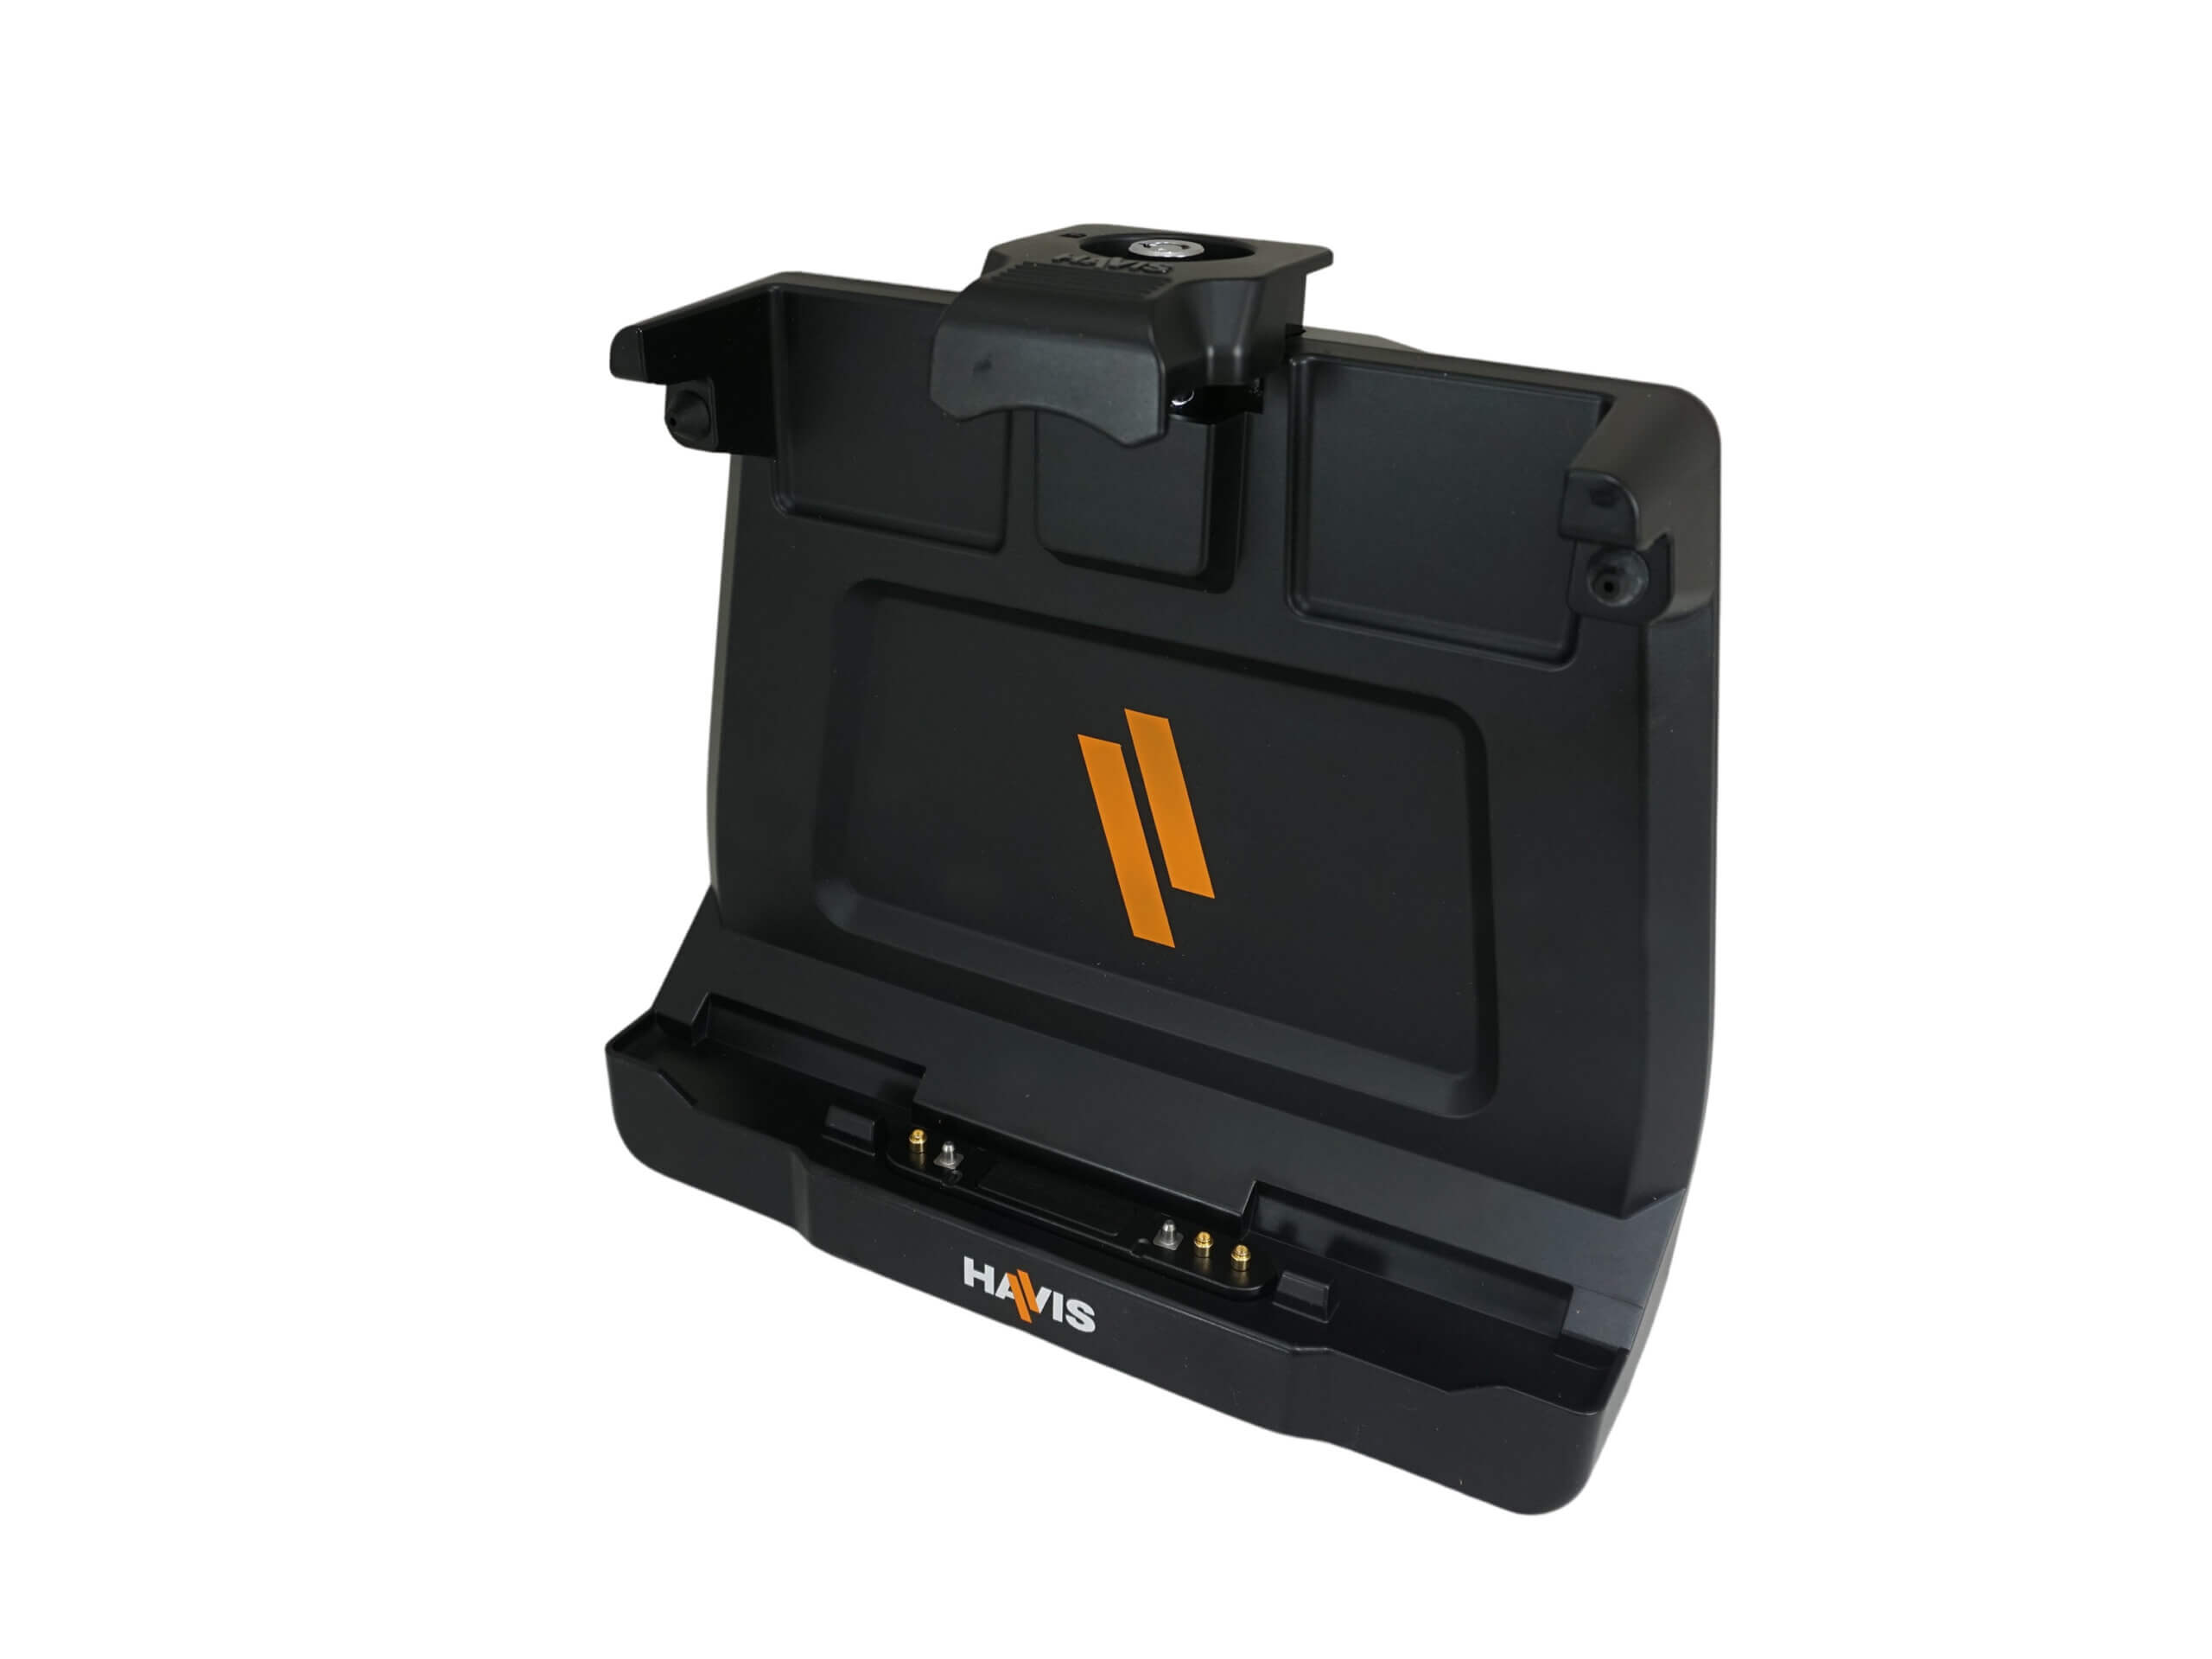 Cradle with Triple Pass-through Antenna Connections for Getac ZX10 Tablet (no dock)